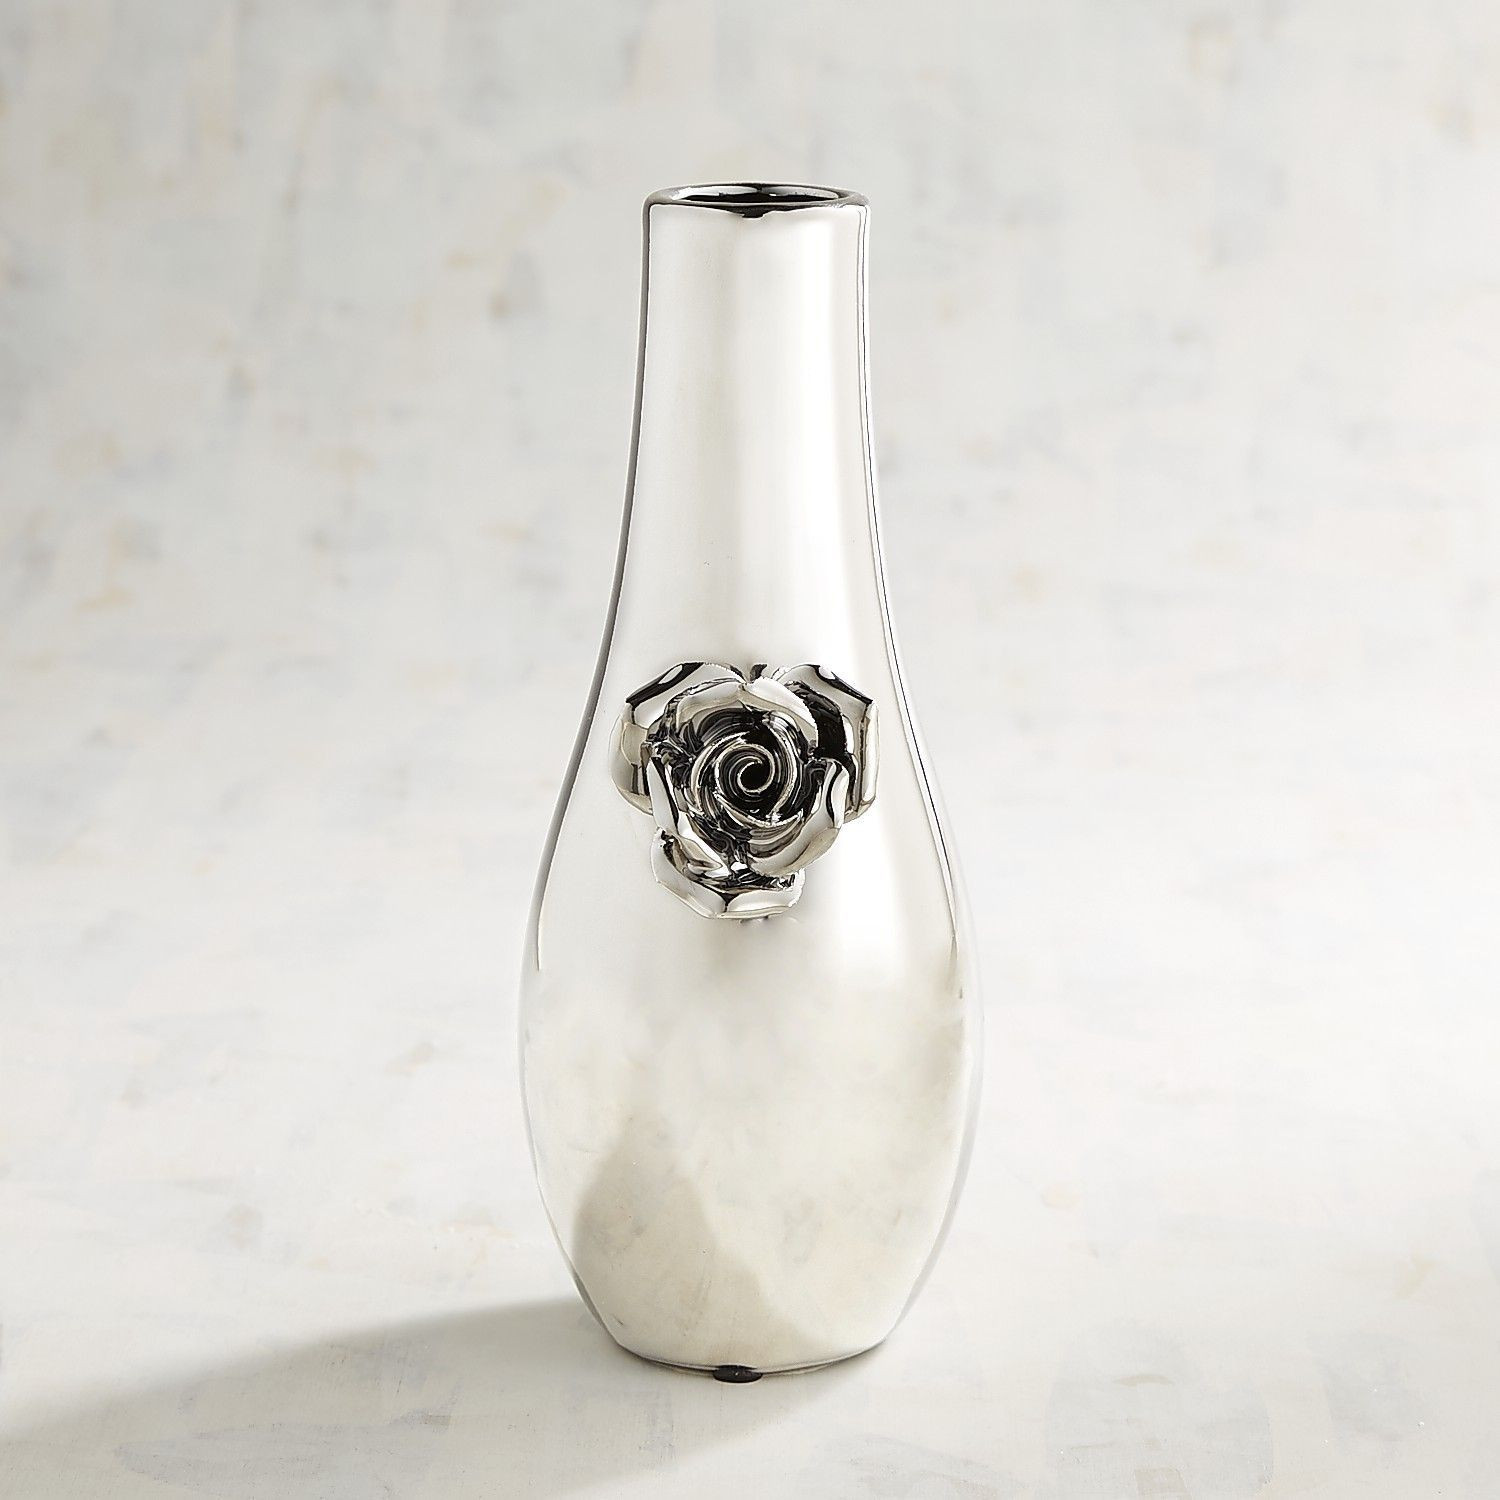 22 Awesome Silver Plated Vase 2024 free download silver plated vase of silver bud vase pictures silver bud vase with flower pinterest within silver bud vase pictures silver bud vase with flower pinterest